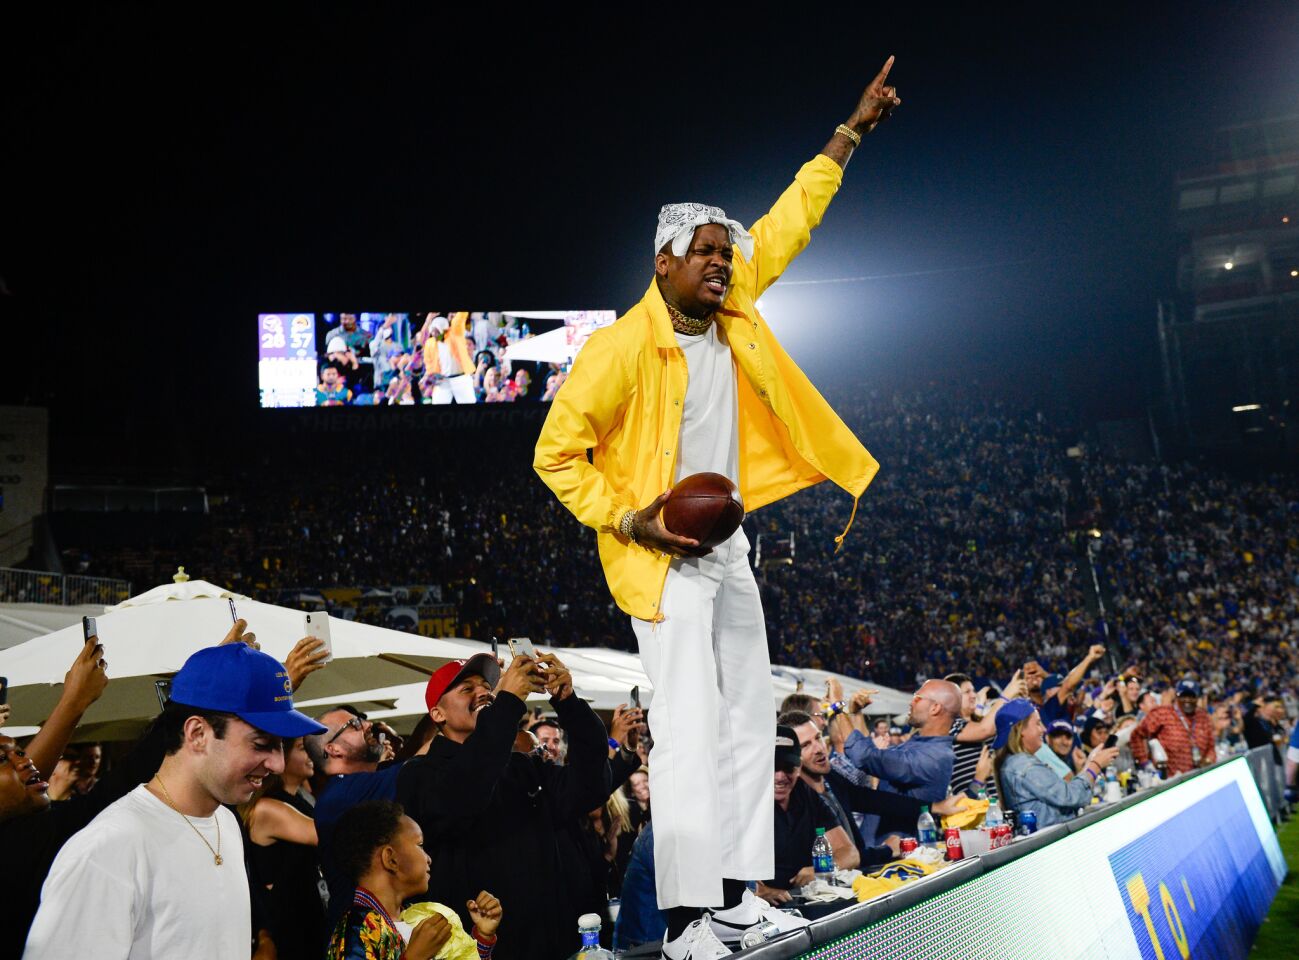 LOS ANGELES, CA - SEPTEMBER 27: Rapper YG stands and cheers with fans at the Los Angeles Rams game against the Minnesota Vikings at Los Angeles Memorial Coliseum on September 27, 2018 in Los Angeles, California. (Photo by Kevork Djansezian/Getty Images) ** OUTS - ELSENT, FPG, CM - OUTS * NM, PH, VA if sourced by CT, LA or MoD **